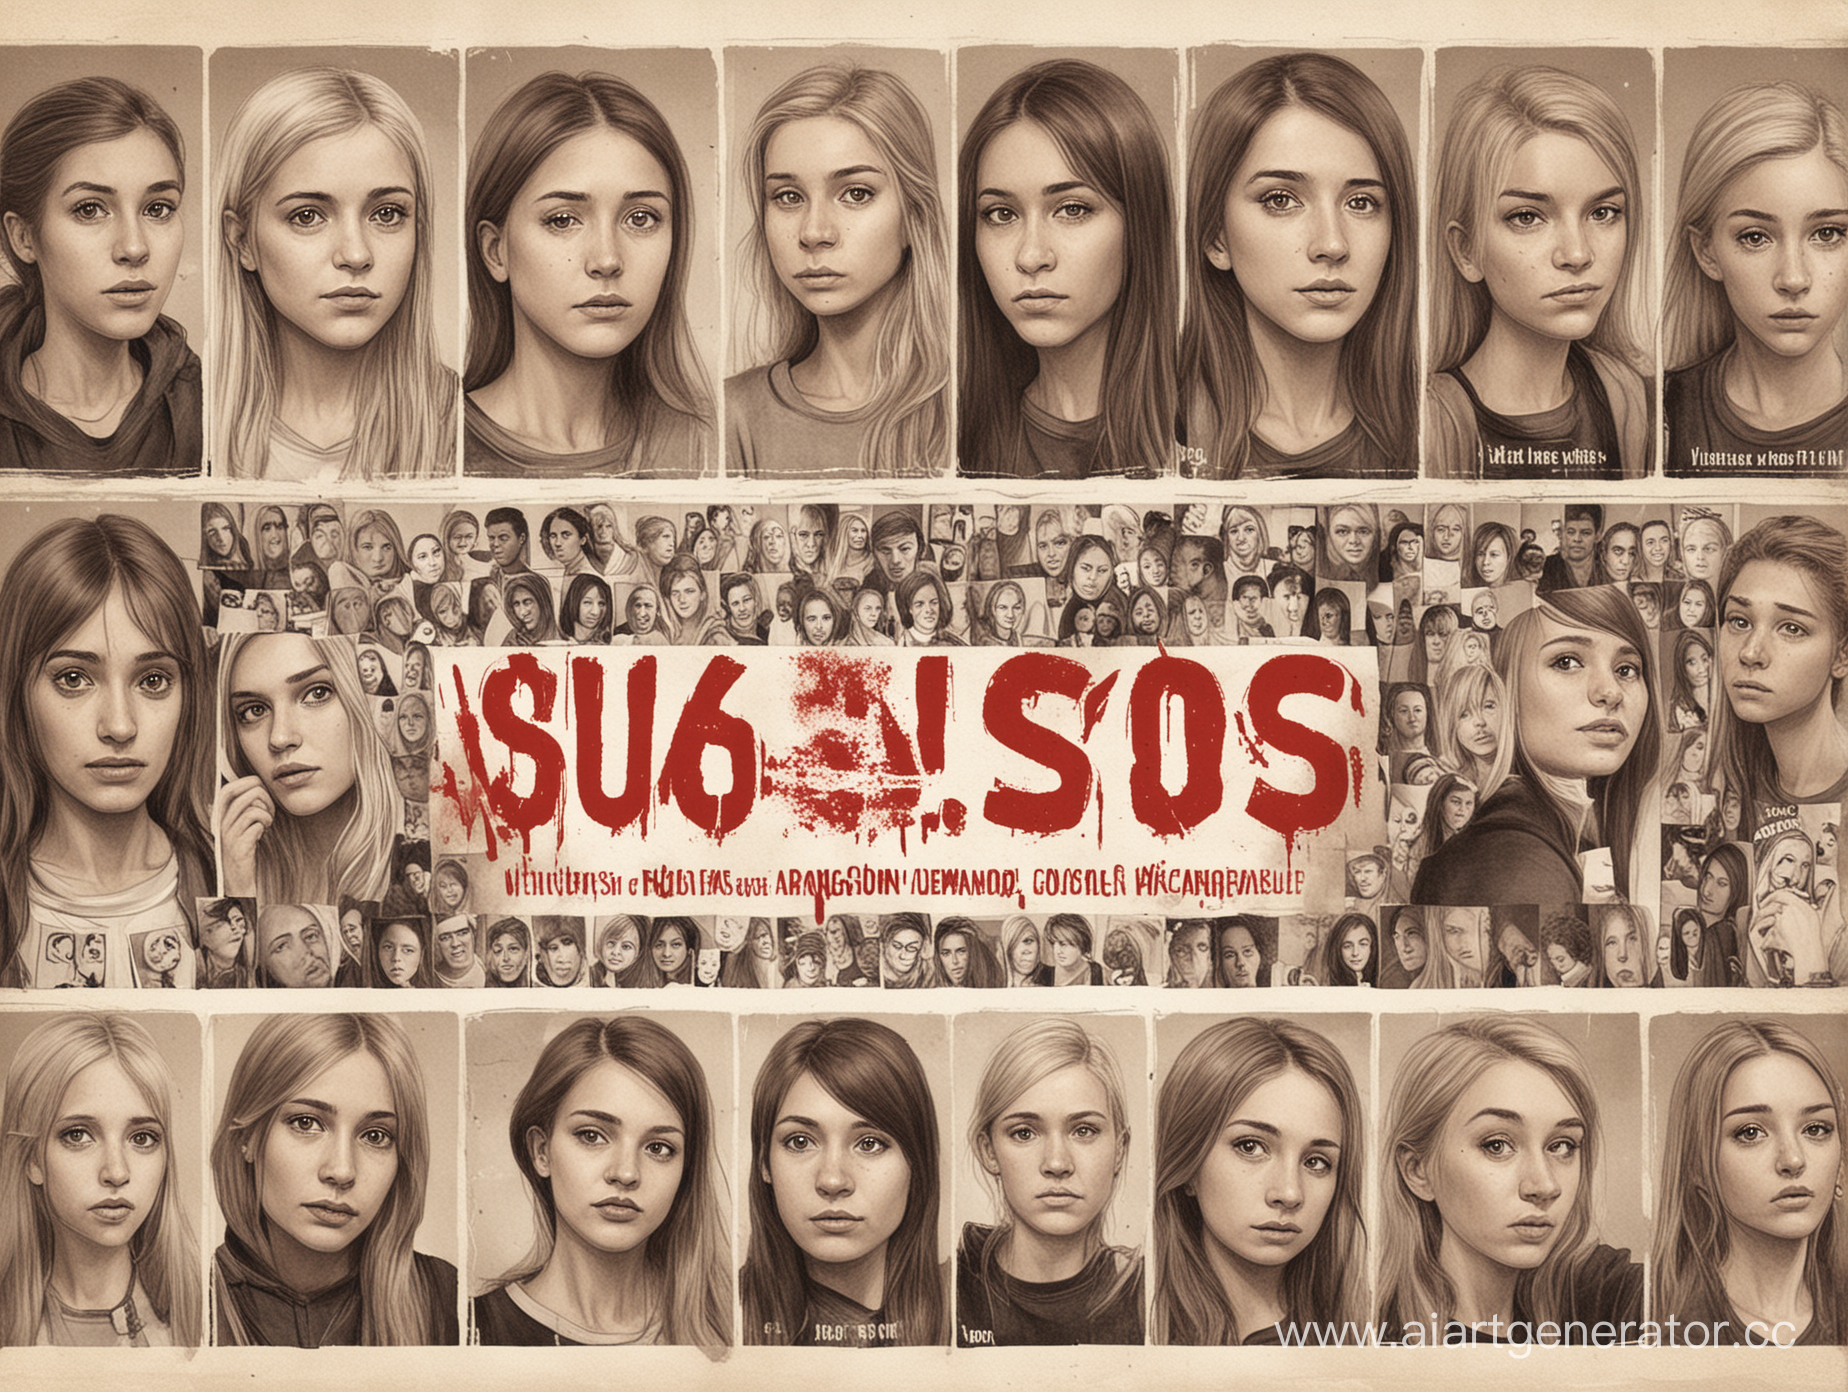 the design of the social site "SOS!!! Victims of violence" for different age groups